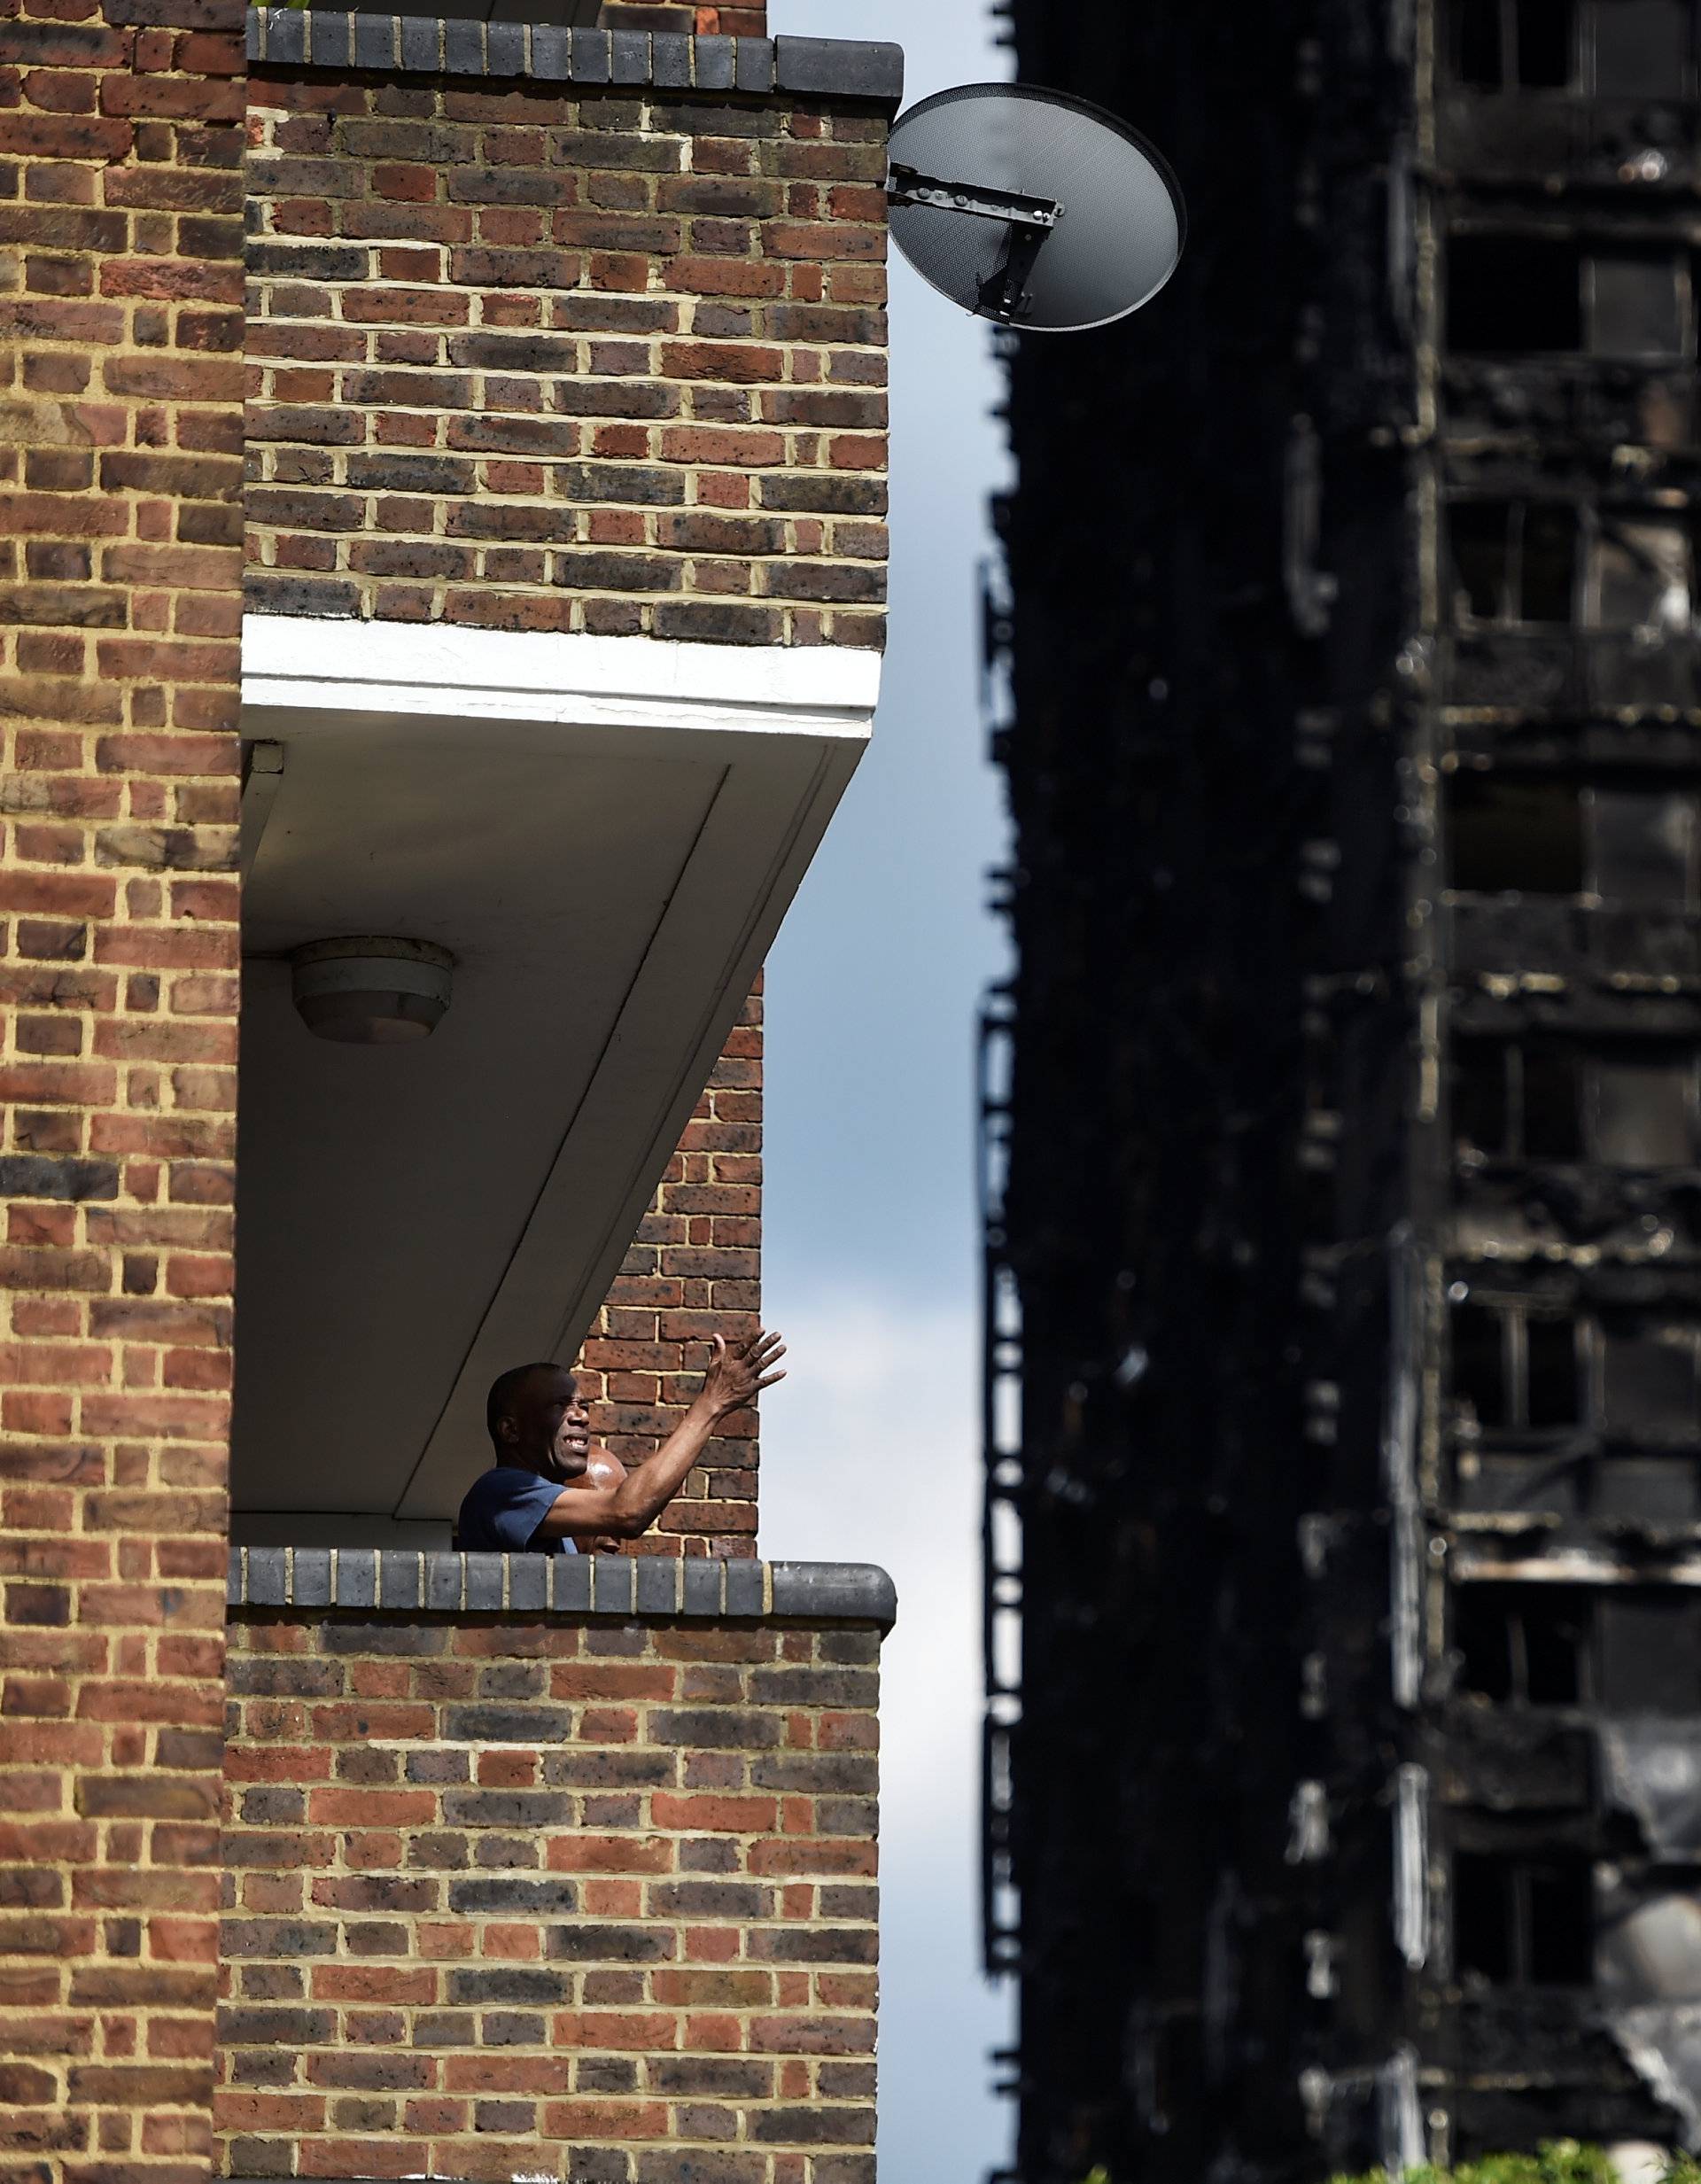 A man stands on his balcony in front of the burnt out shell of the Grenfell apartment tower block in North Kensington, London